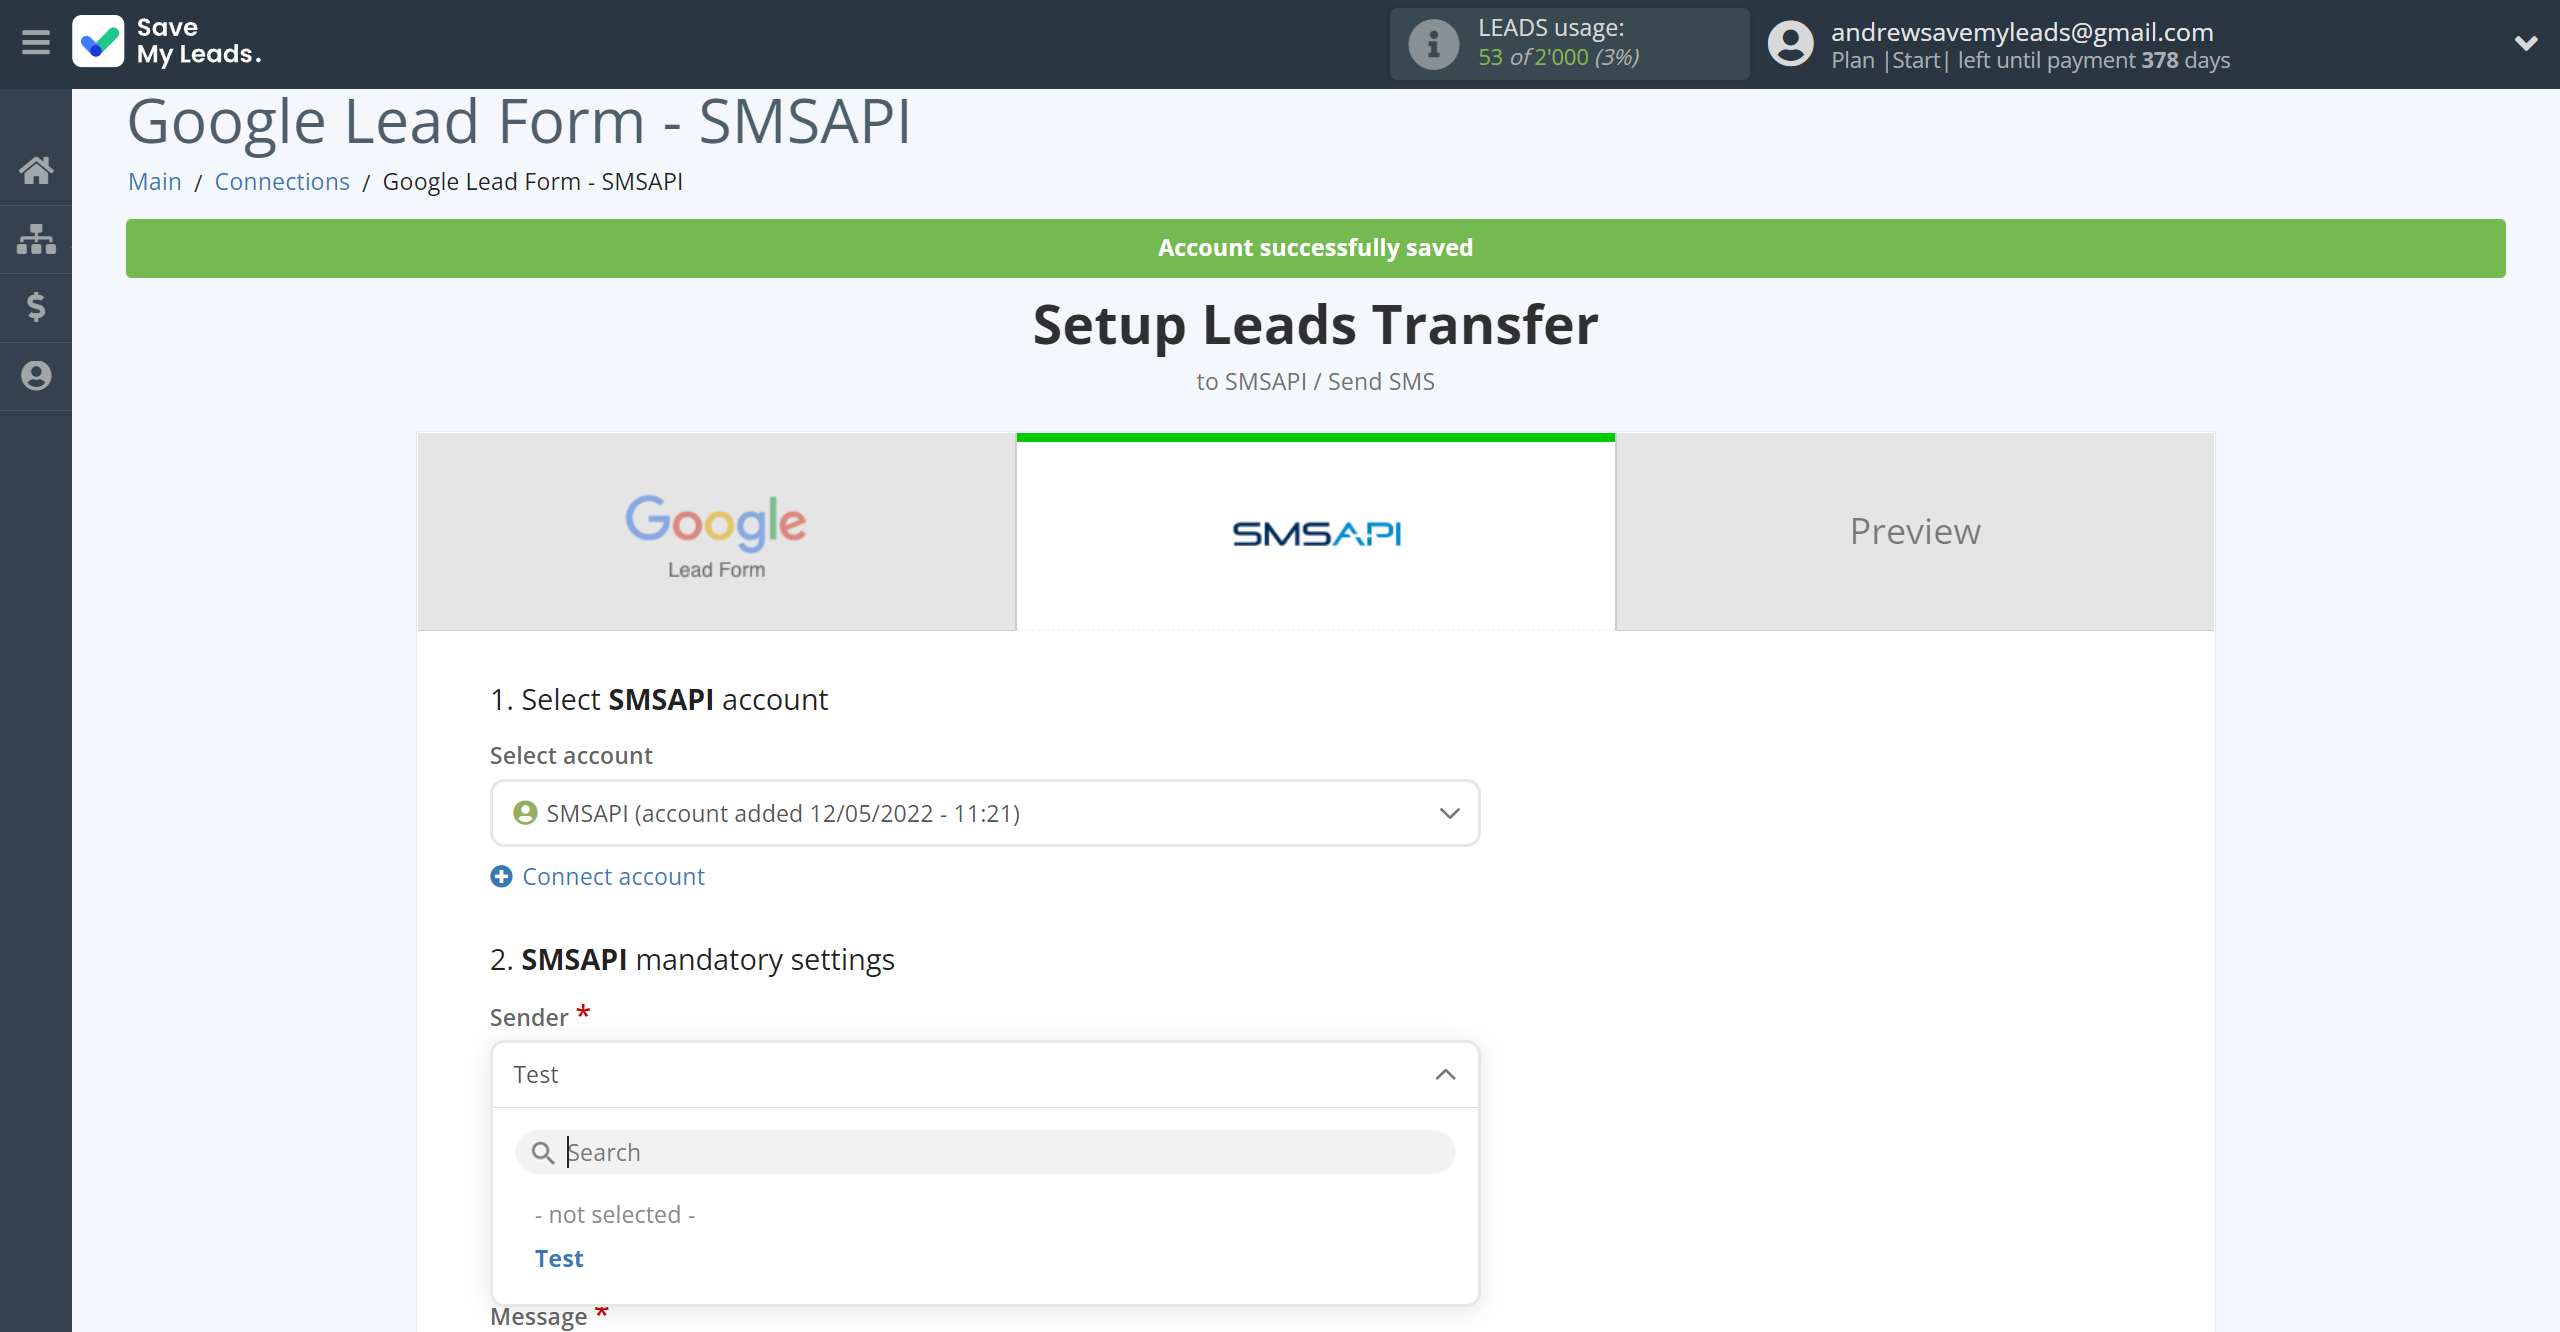 How to Connect Google Lead Form with SMSAPI | Assigning fields